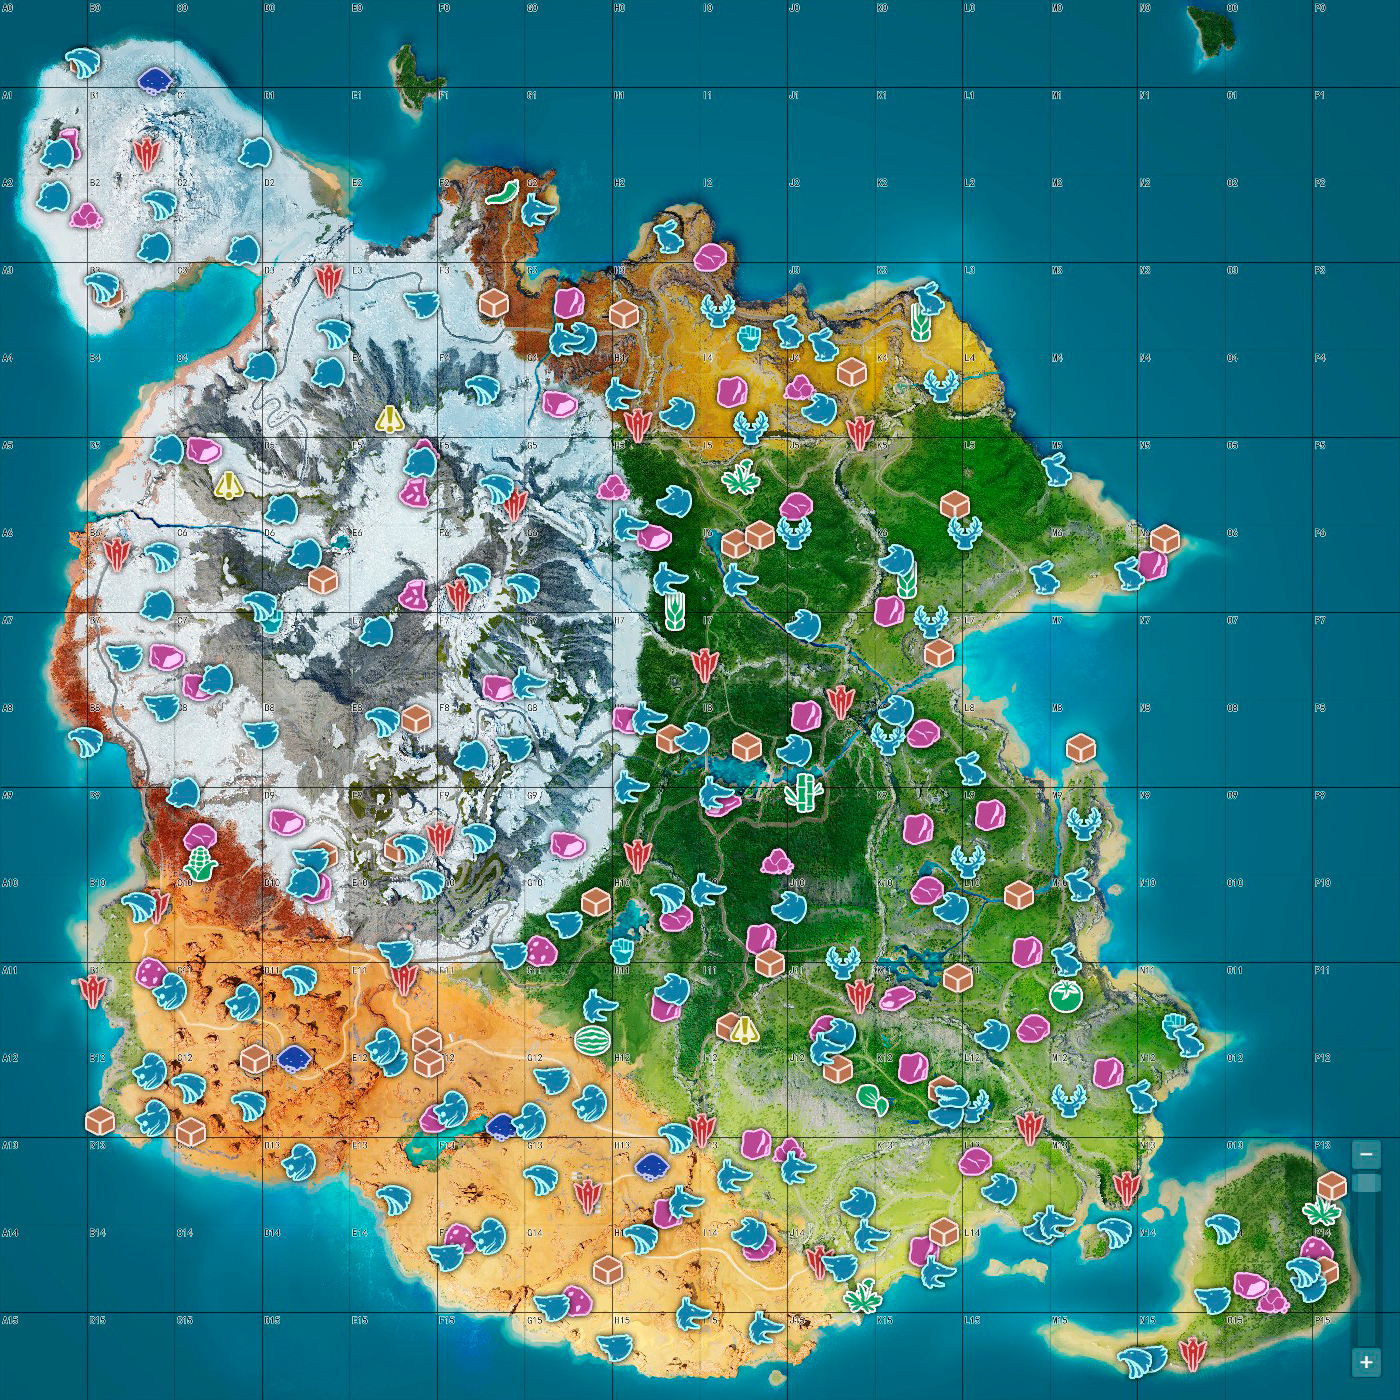 Steam Community :: Guide :: General Rough Map